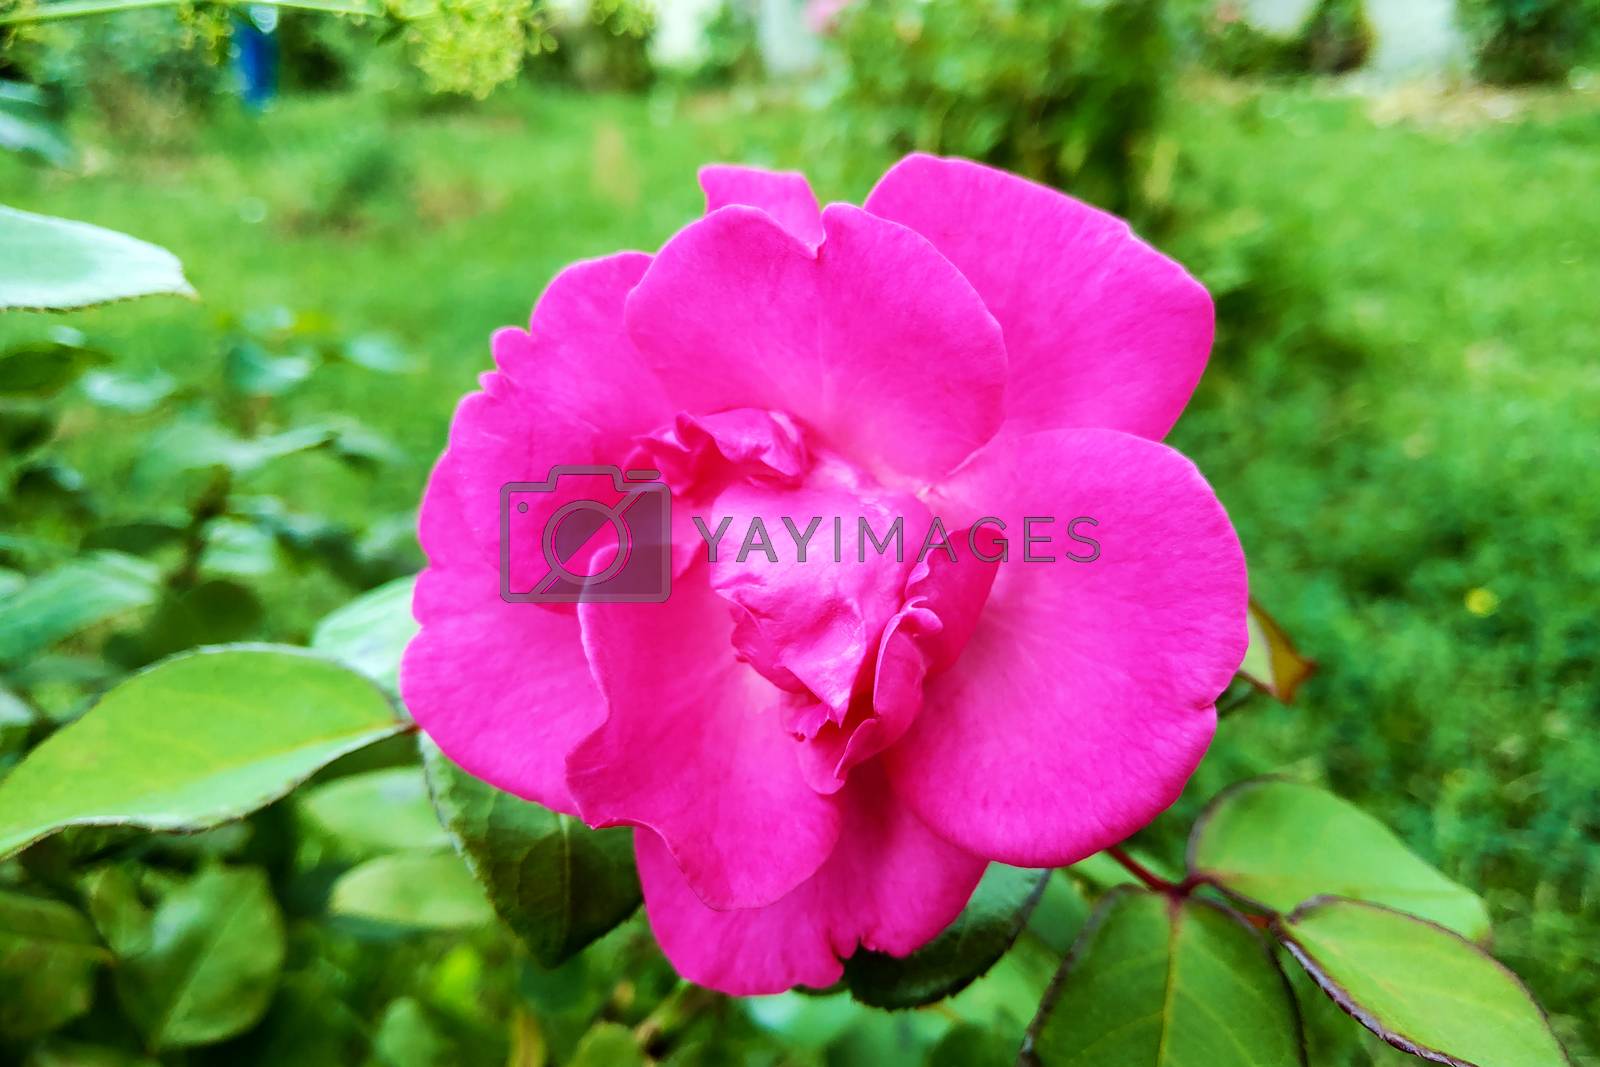 Royalty free image of Beautiful bright roses in the garden on a sunny clear day. by kip02kas